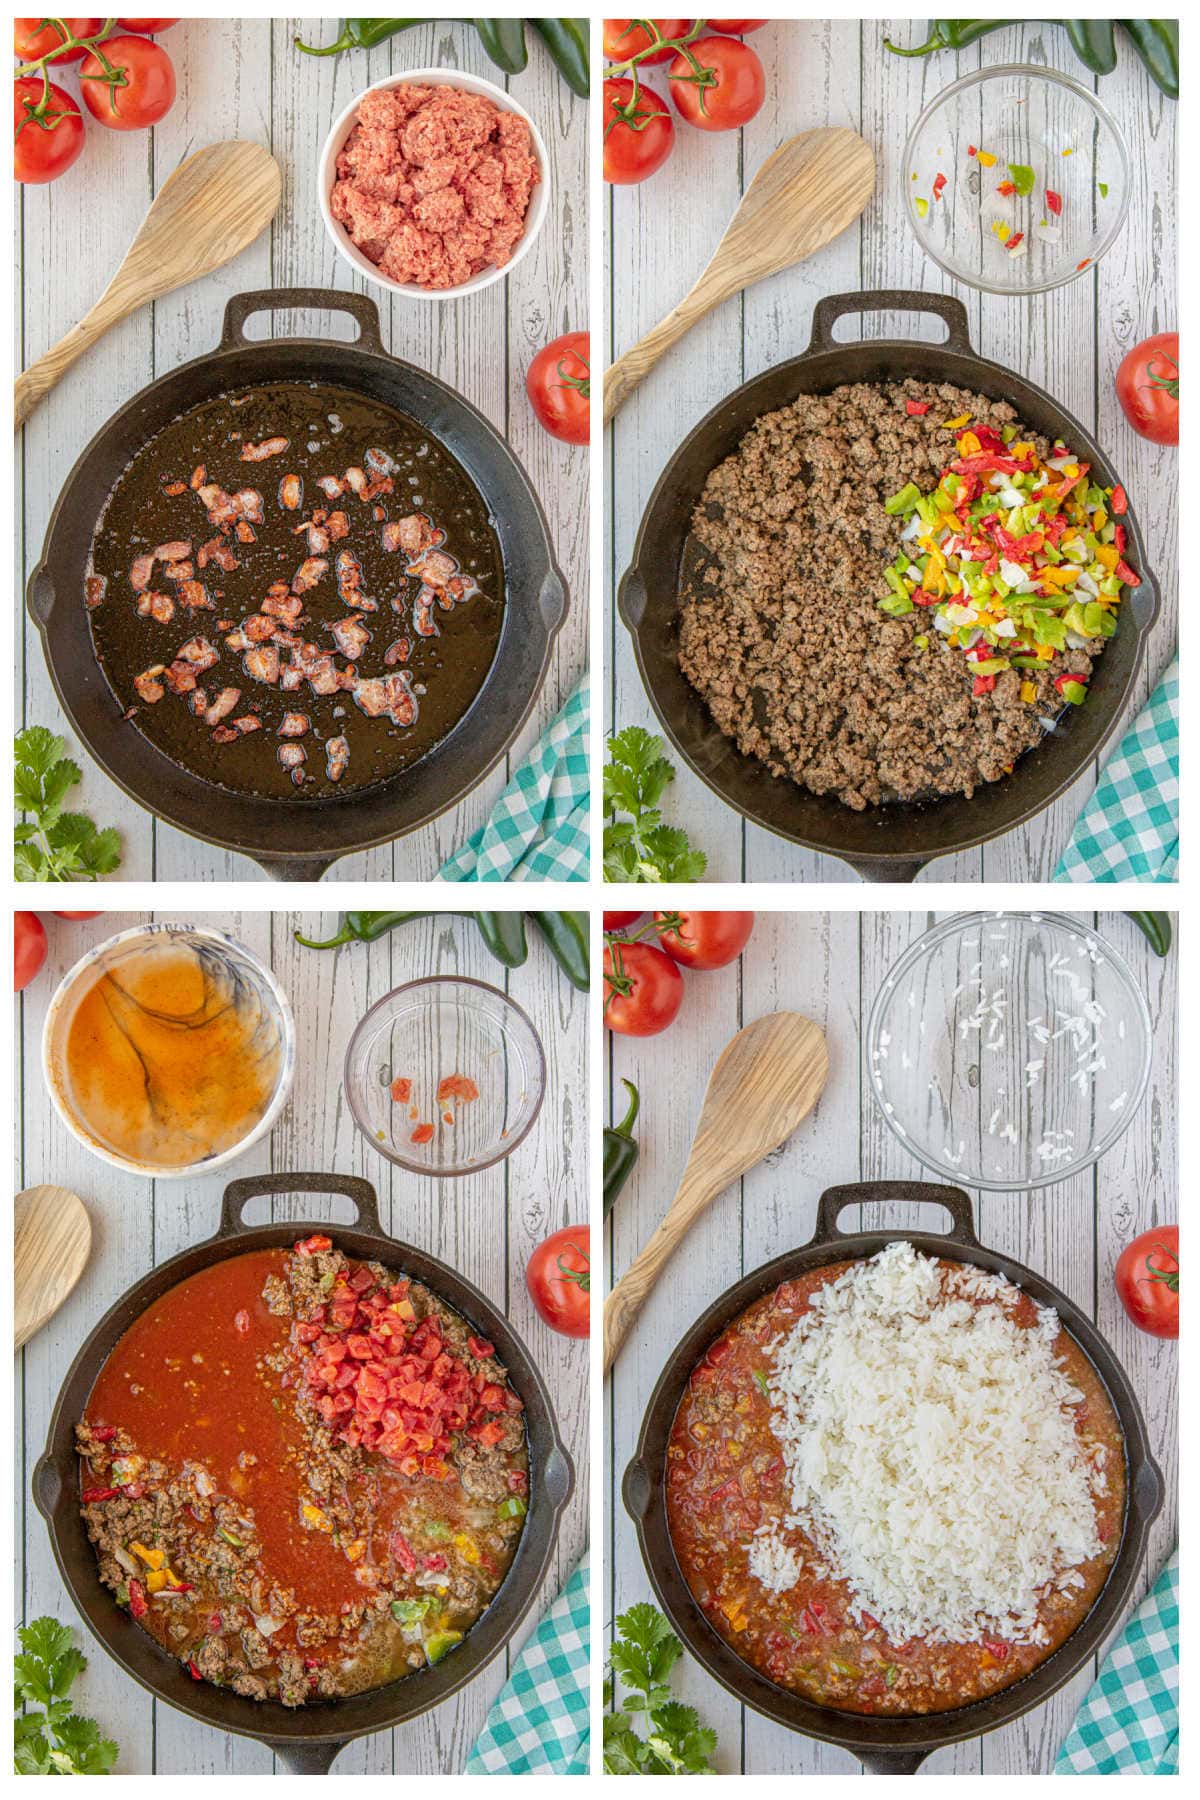 Step by step images showing how to make Spanish rice.